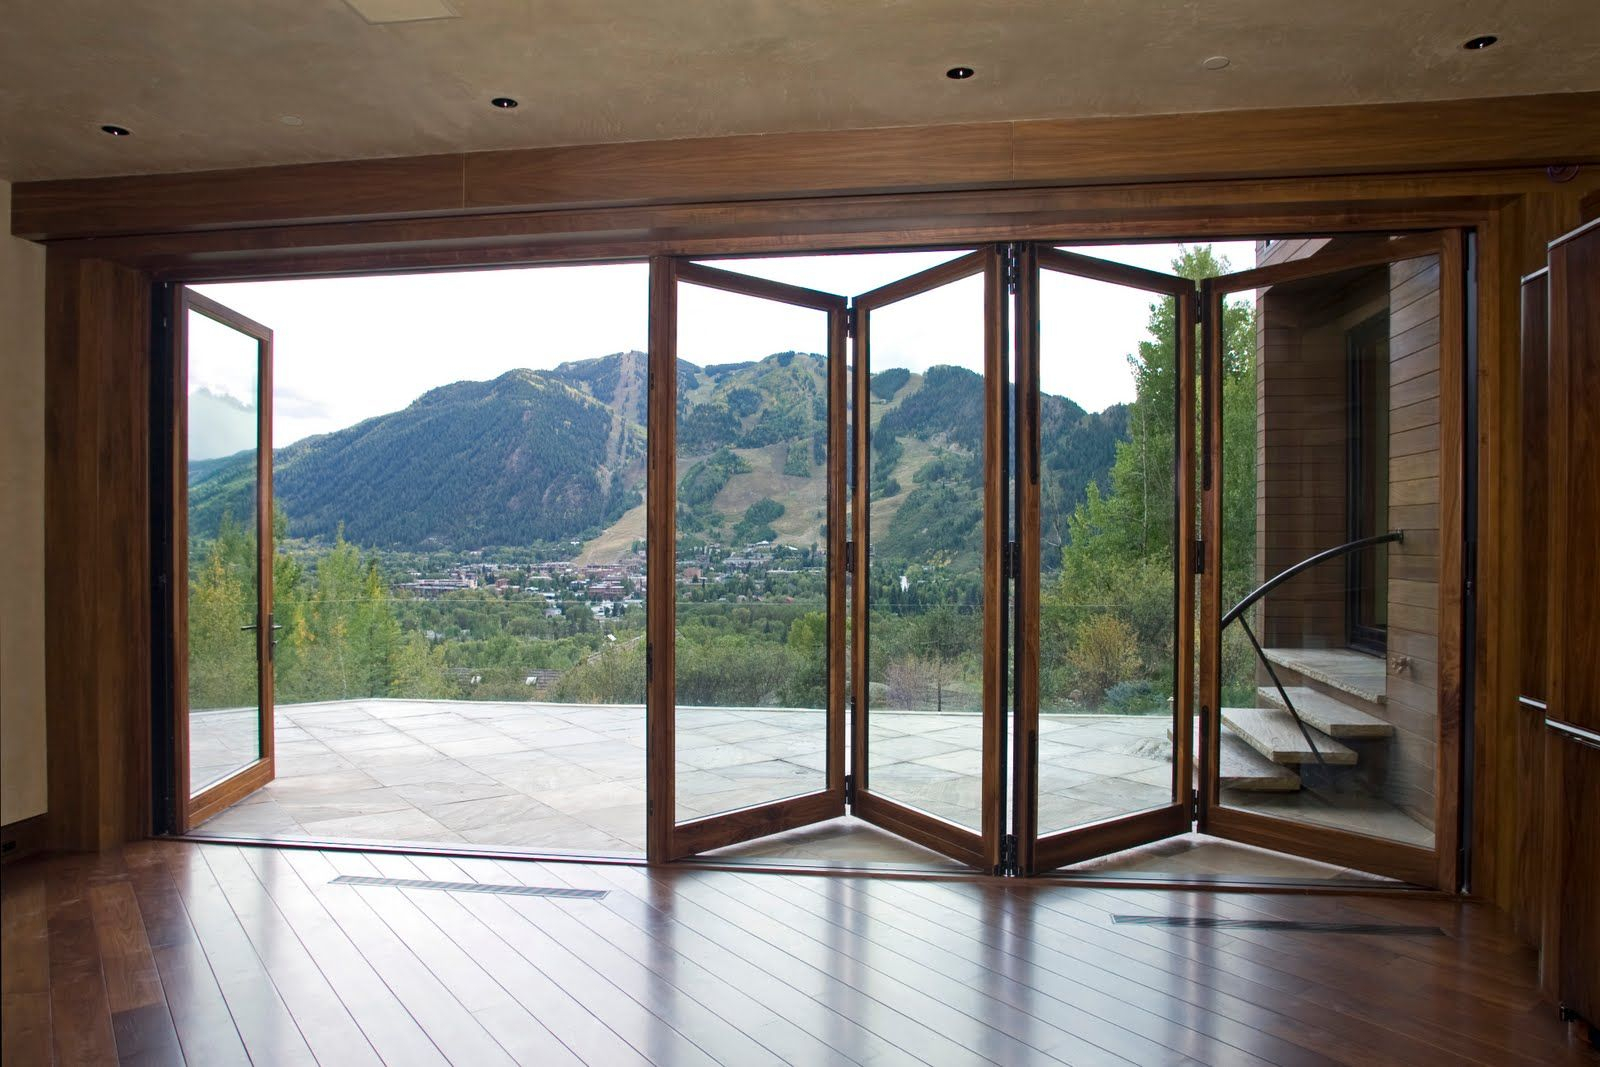 Amazing View Photos Accordion Glass Doors On The Page Posted A inside sizing 1600 X 1067